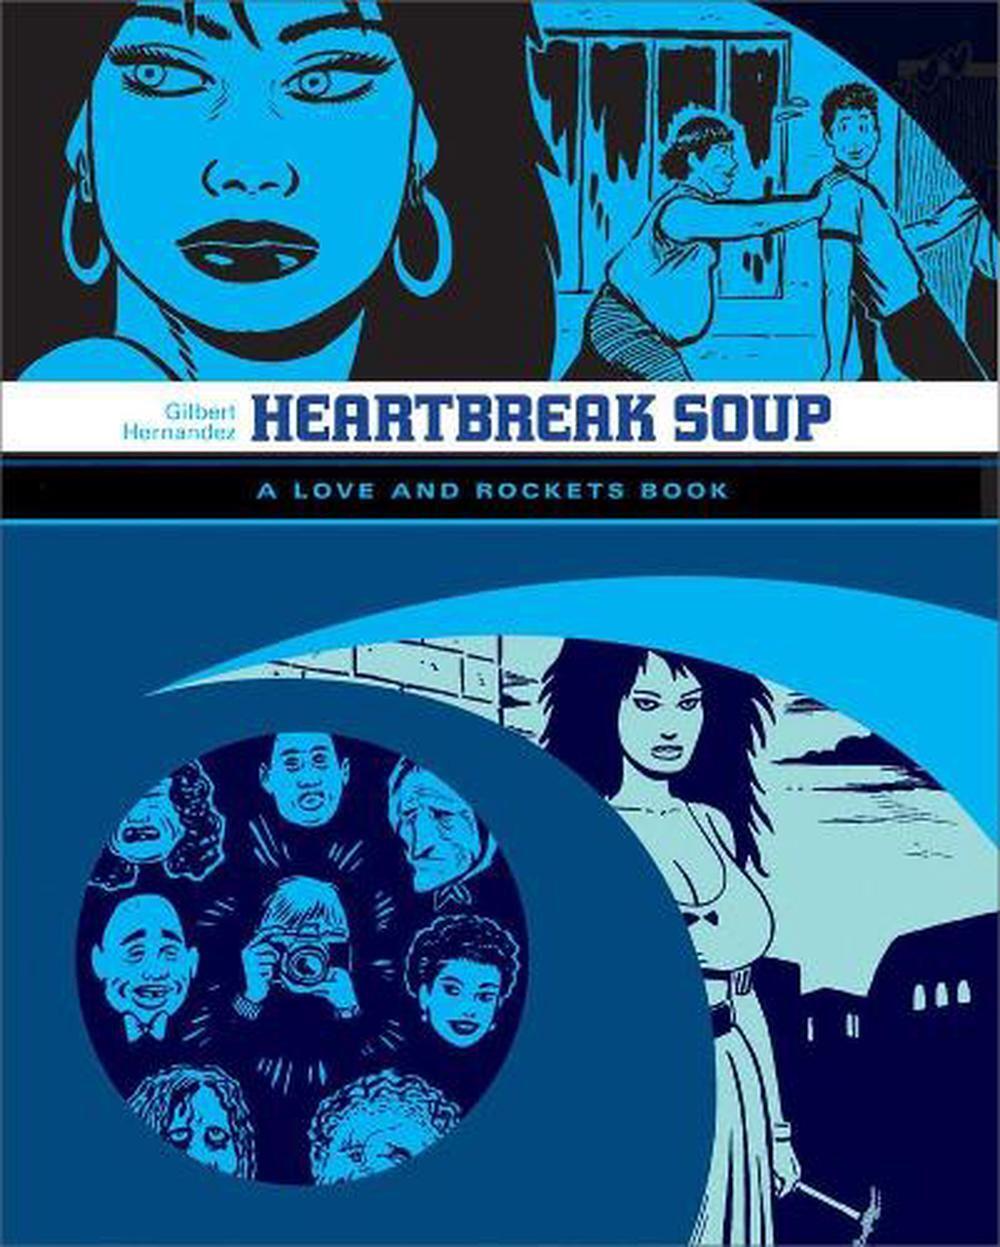 Love And Rockets: Heartbreak Soup: The First Volume of \'Palomar\' Stories from Lo